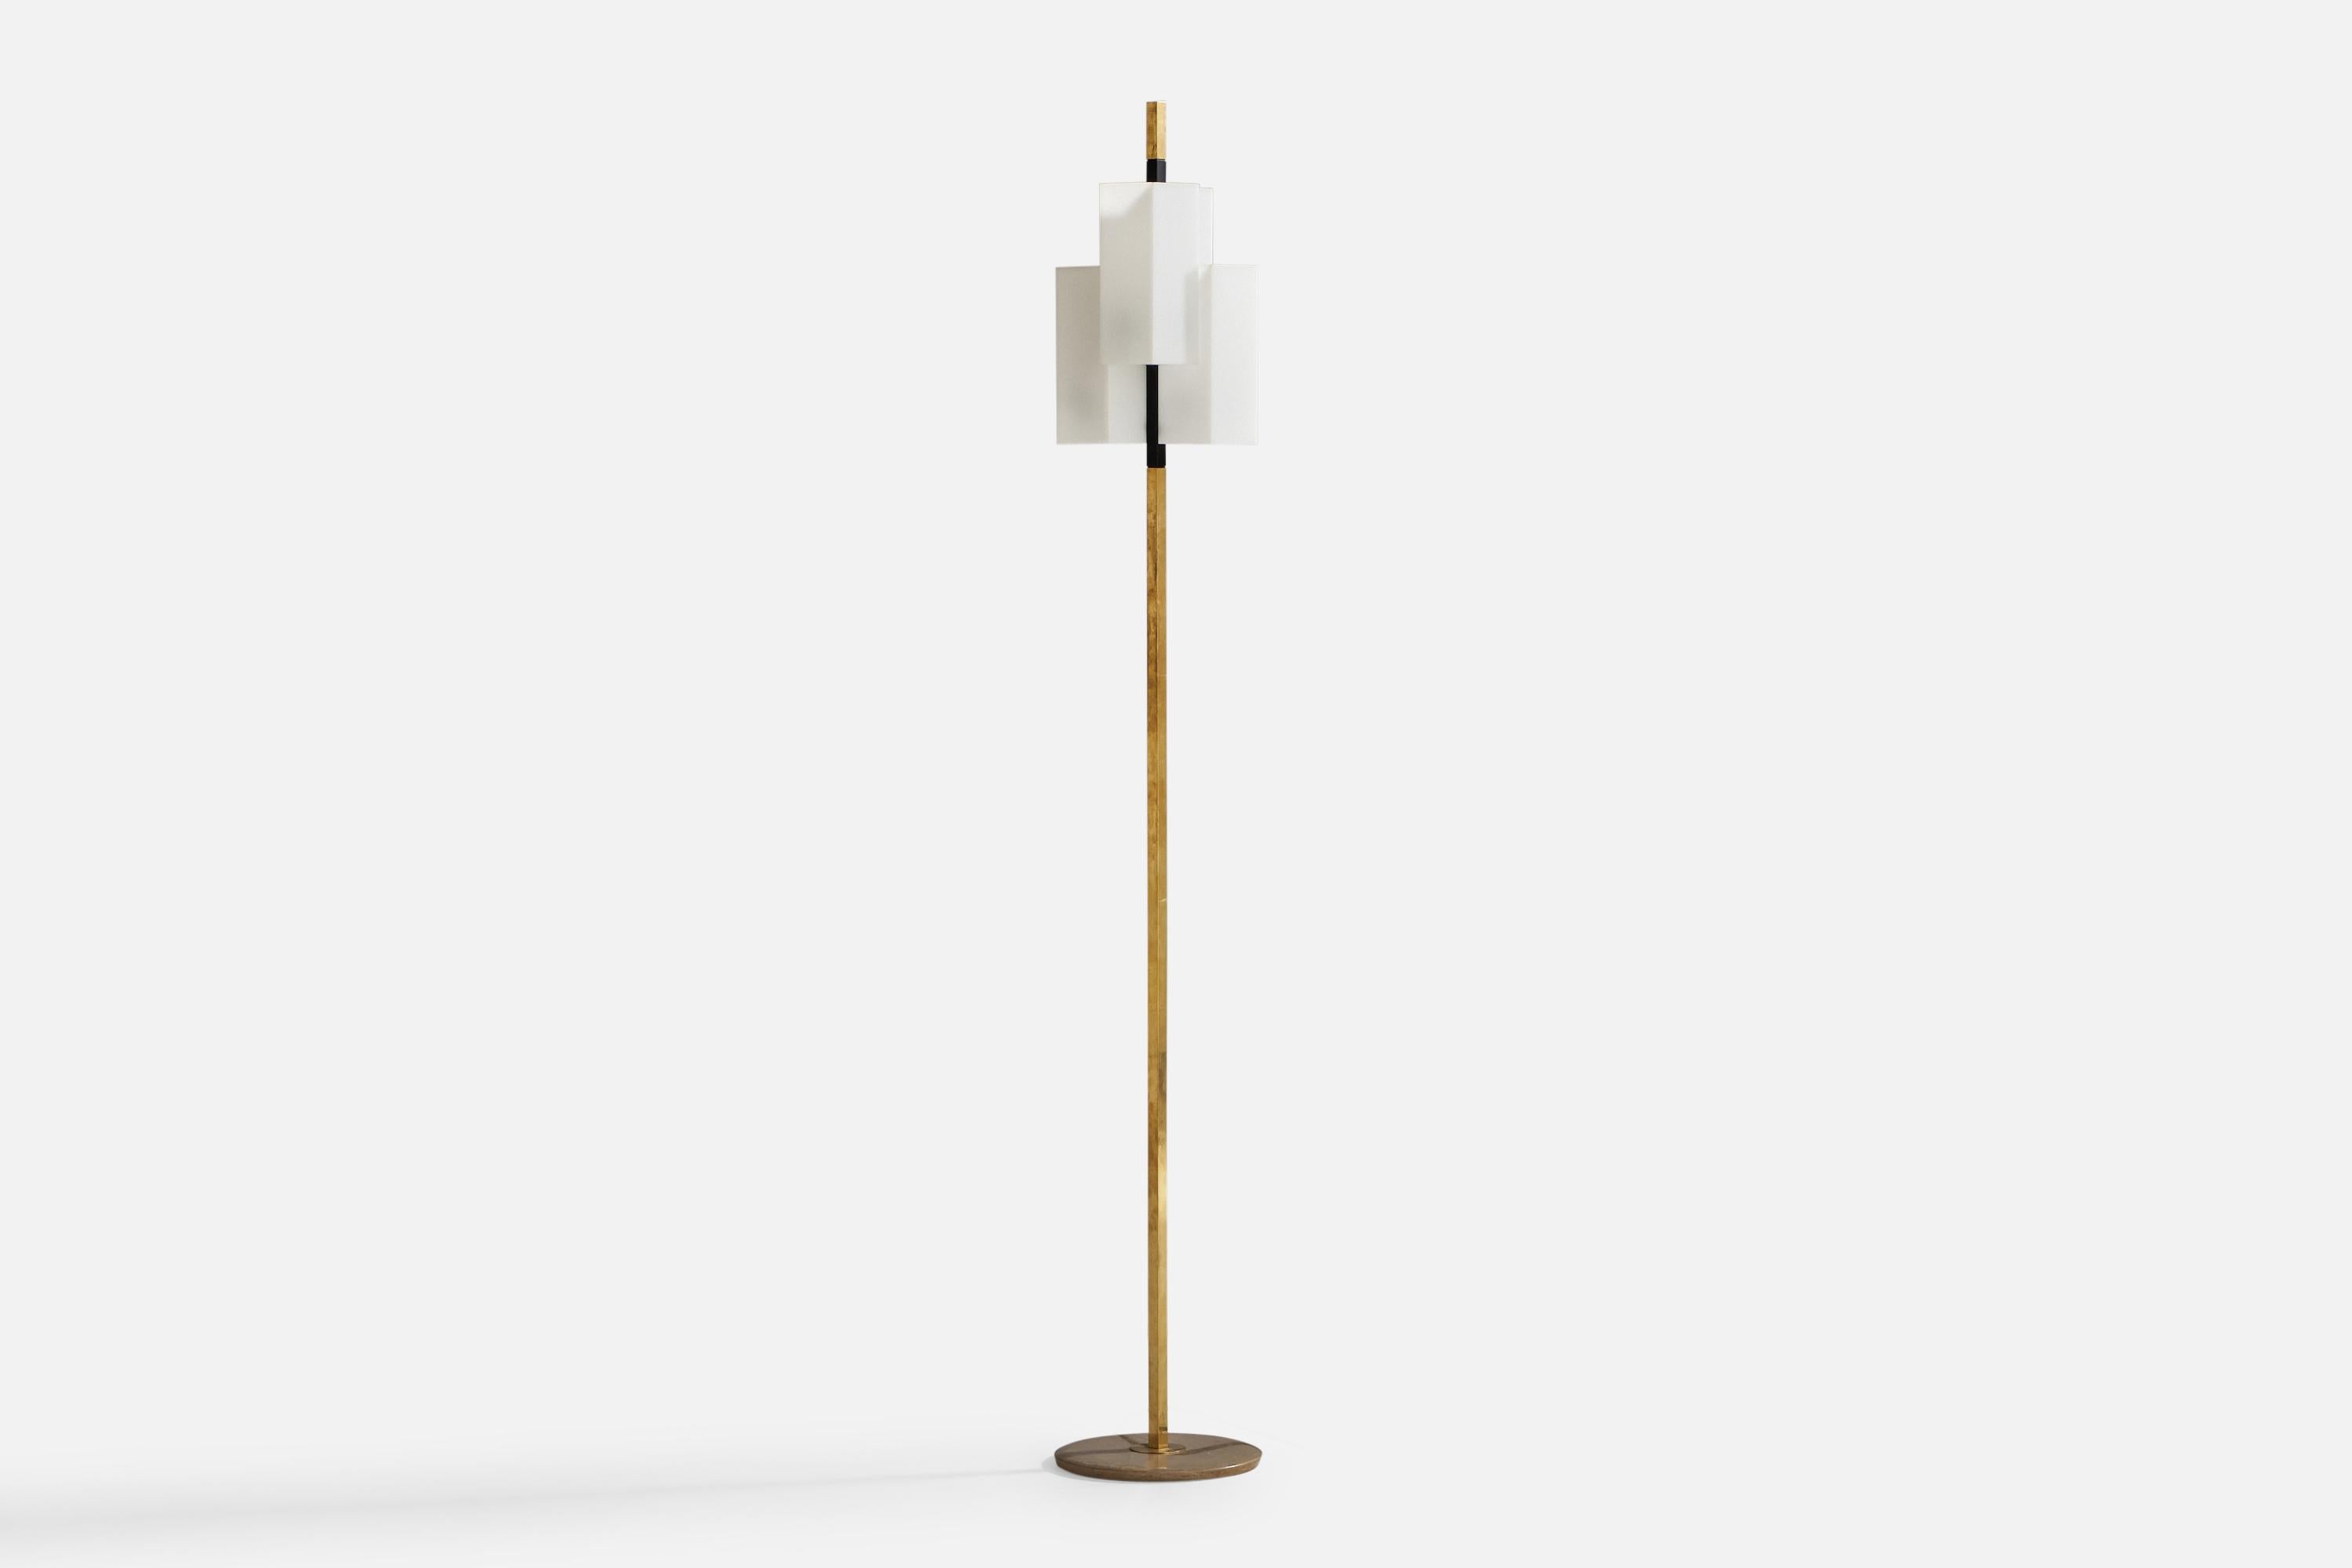 A brass, black-lacquered metal, marble and acrylic floor lamp designed and produced by Stilux Milano, Italy, 1960s.

Overall Dimensions (inches): 12” H x 7.5” W x 17.75” D
Bulb Specifications: E-26 Bulb
Number of Sockets: 4
 
All lighting will be